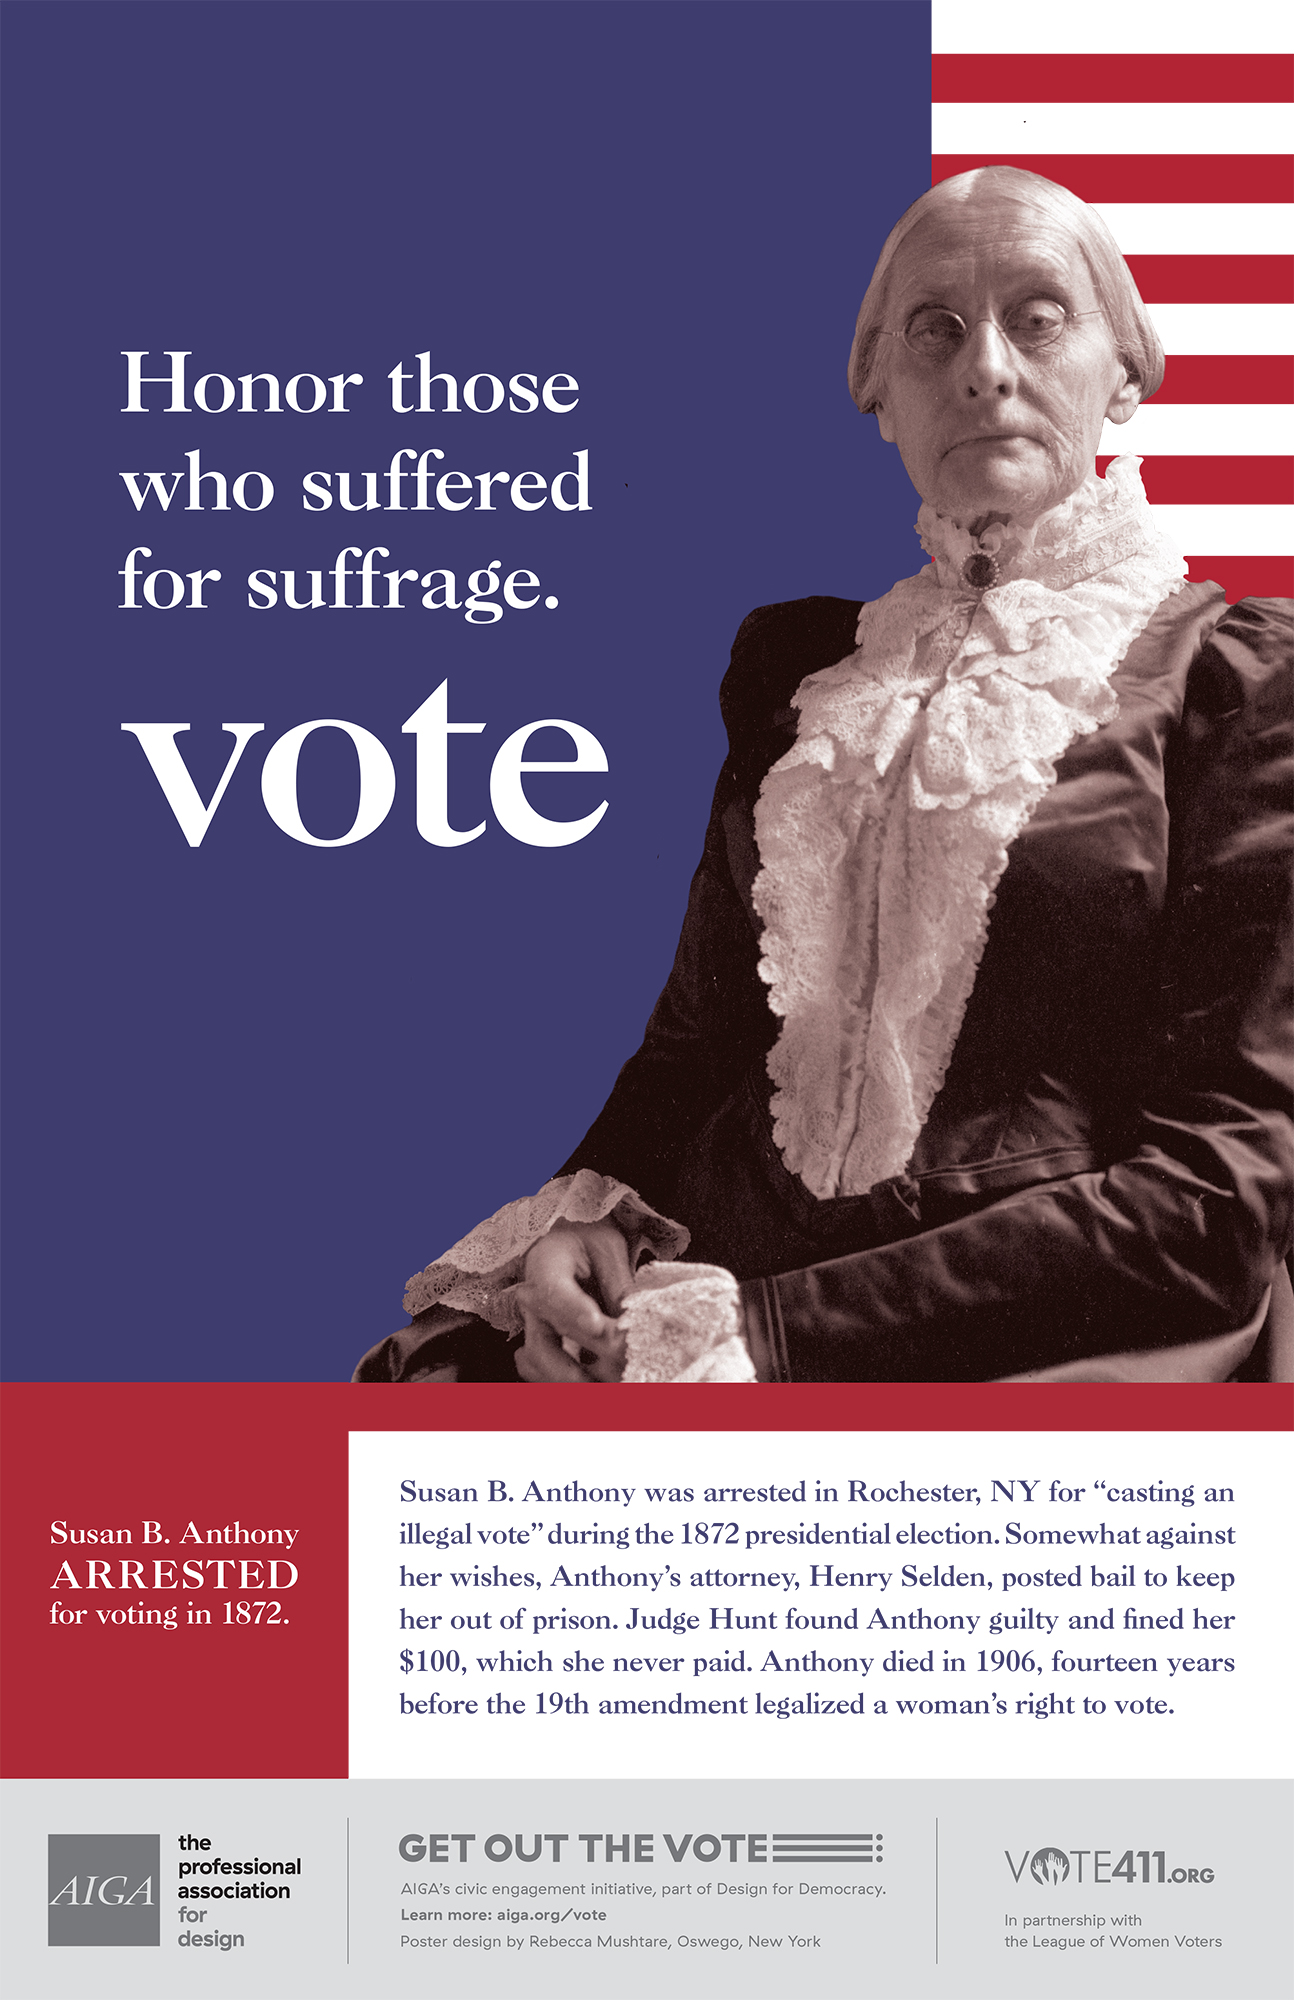 Honor those who suffered for suffrage. Vote.